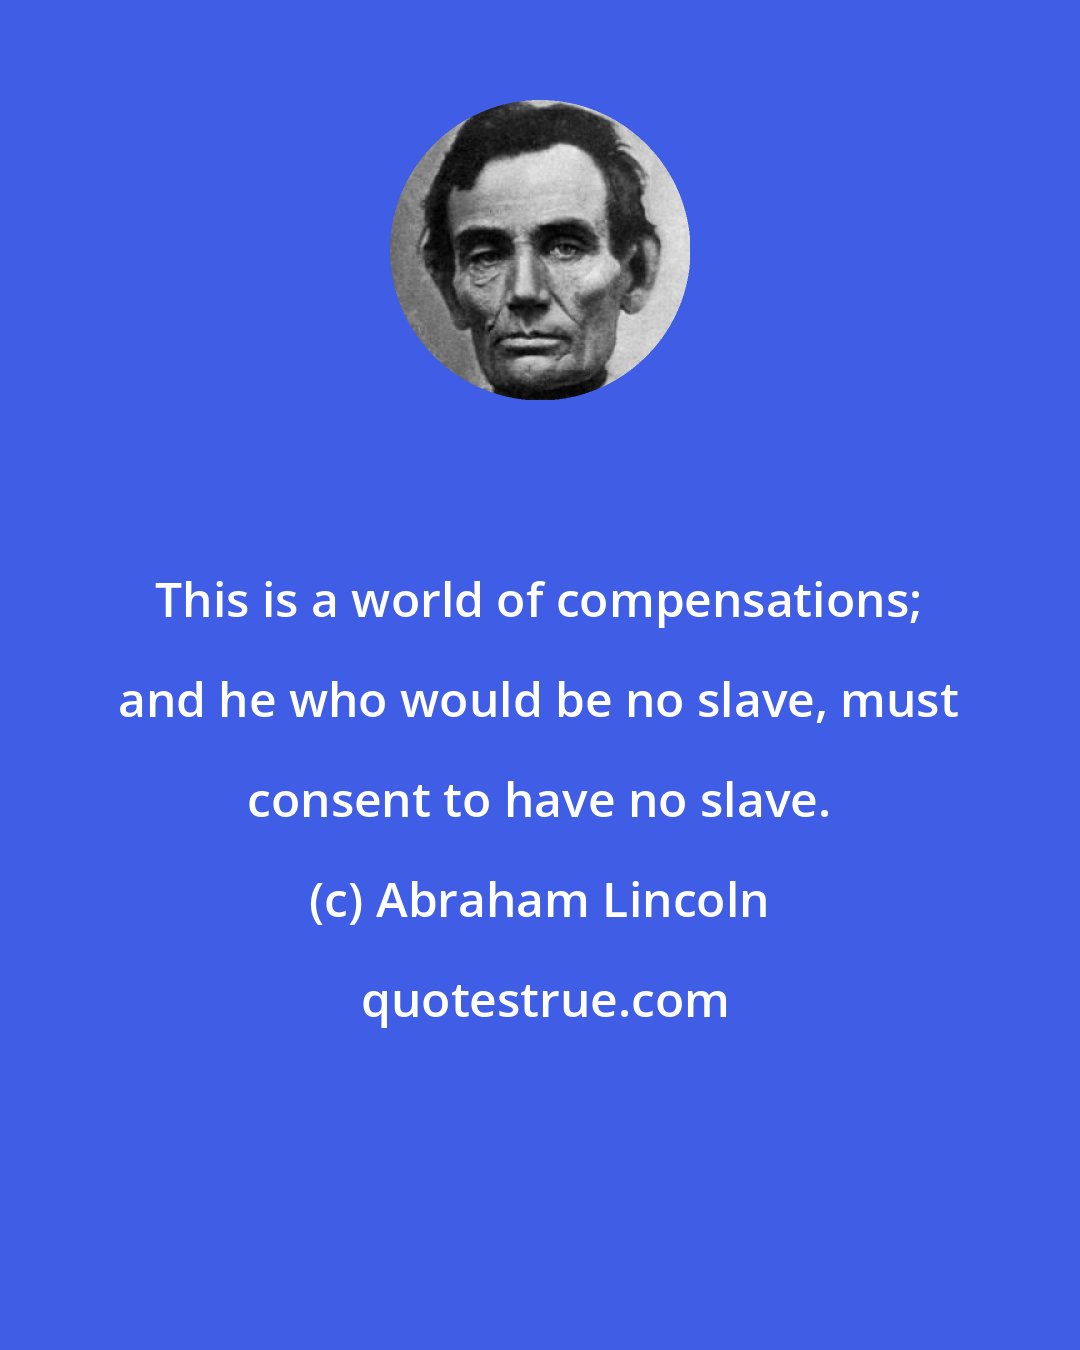 Abraham Lincoln: This is a world of compensations; and he who would be no slave, must consent to have no slave.